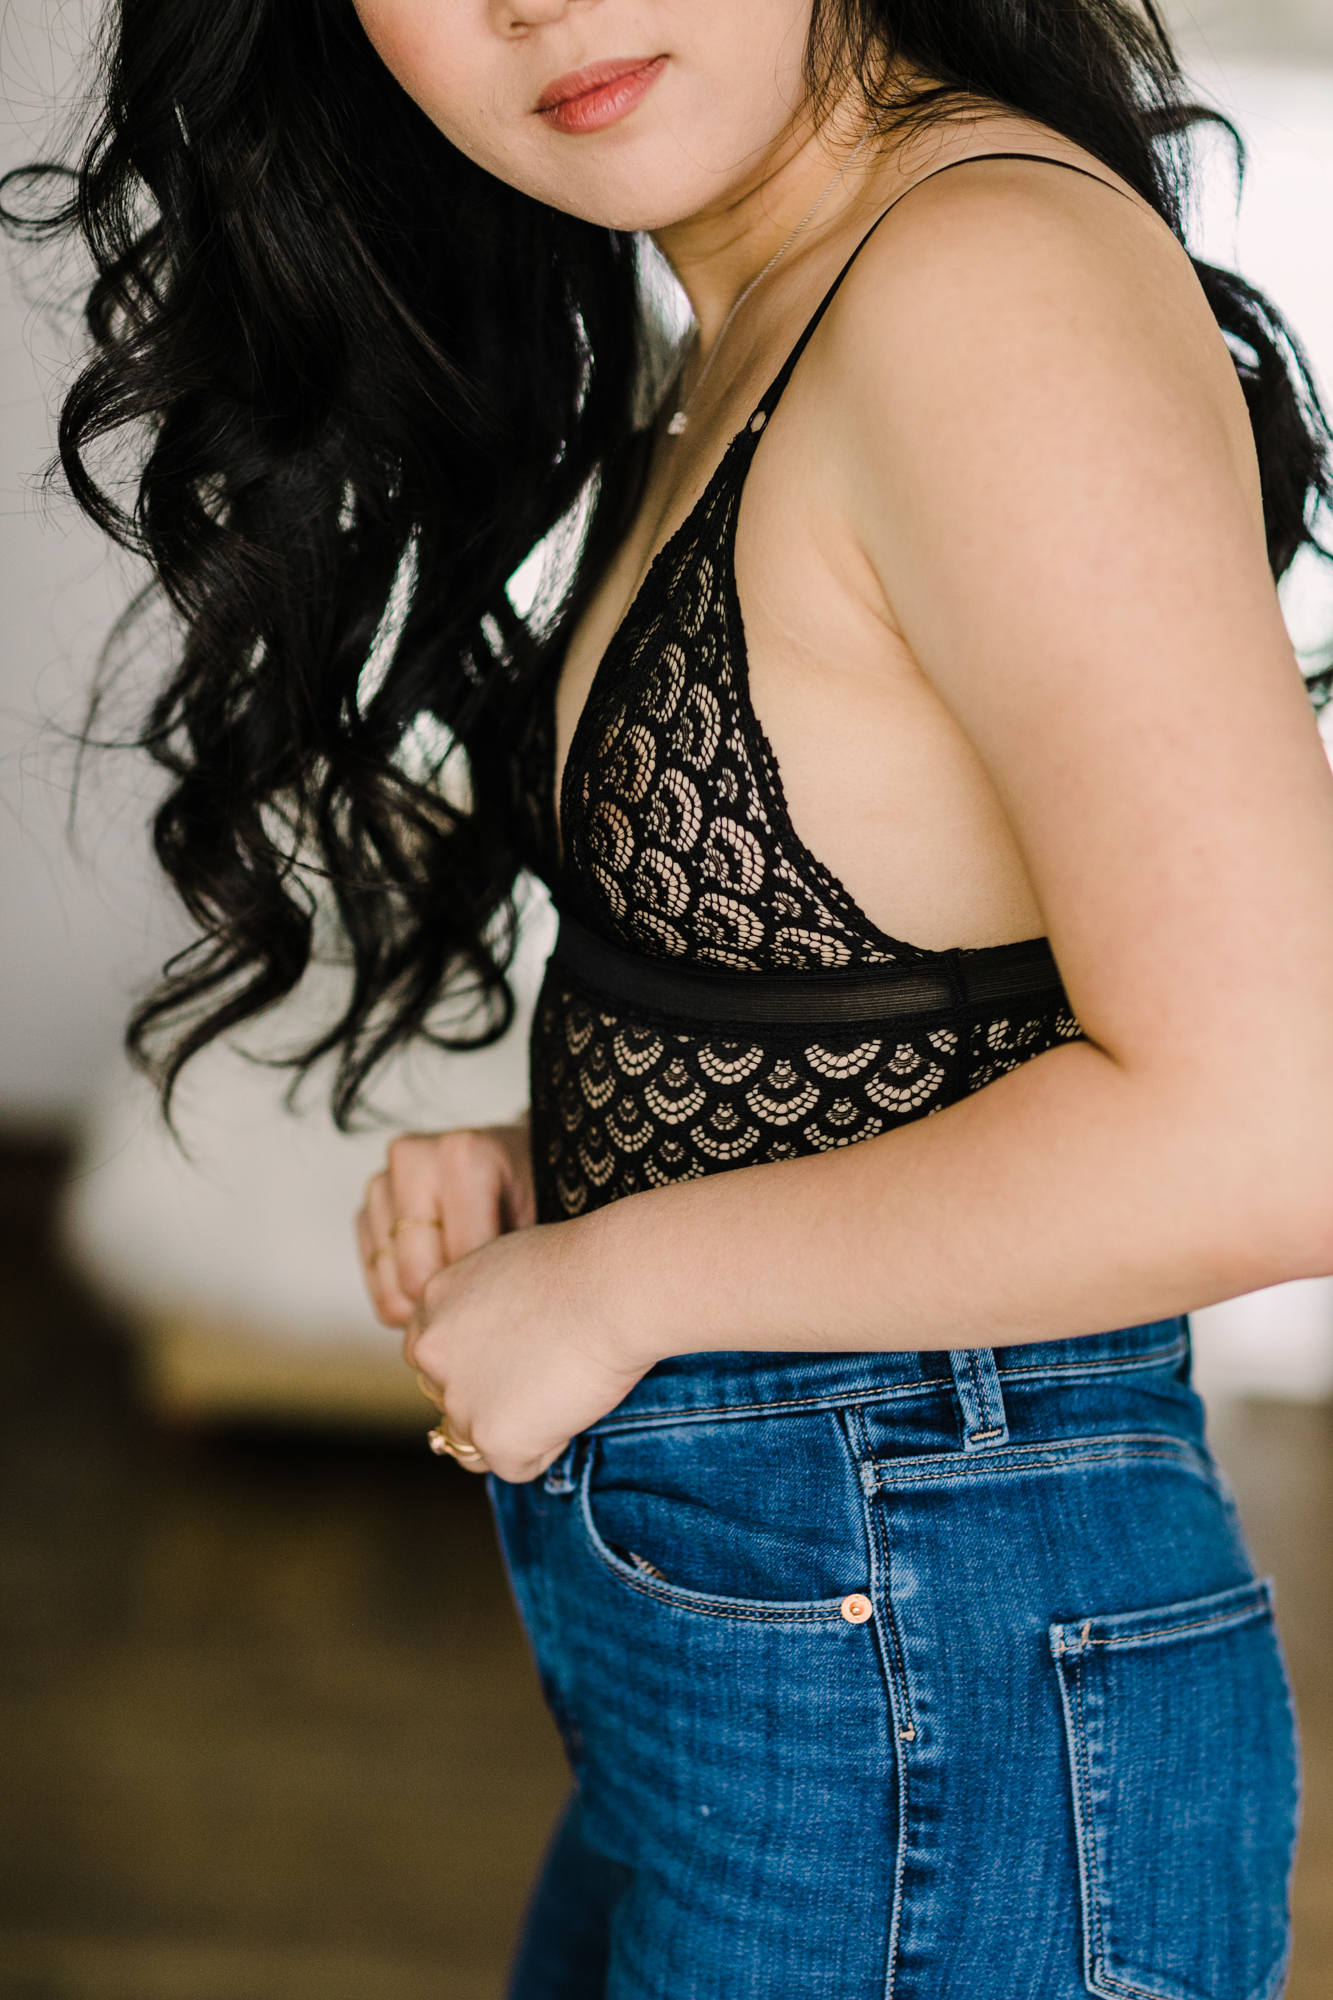 10 Boudoir Photography Outfit Ideas from Your Closet